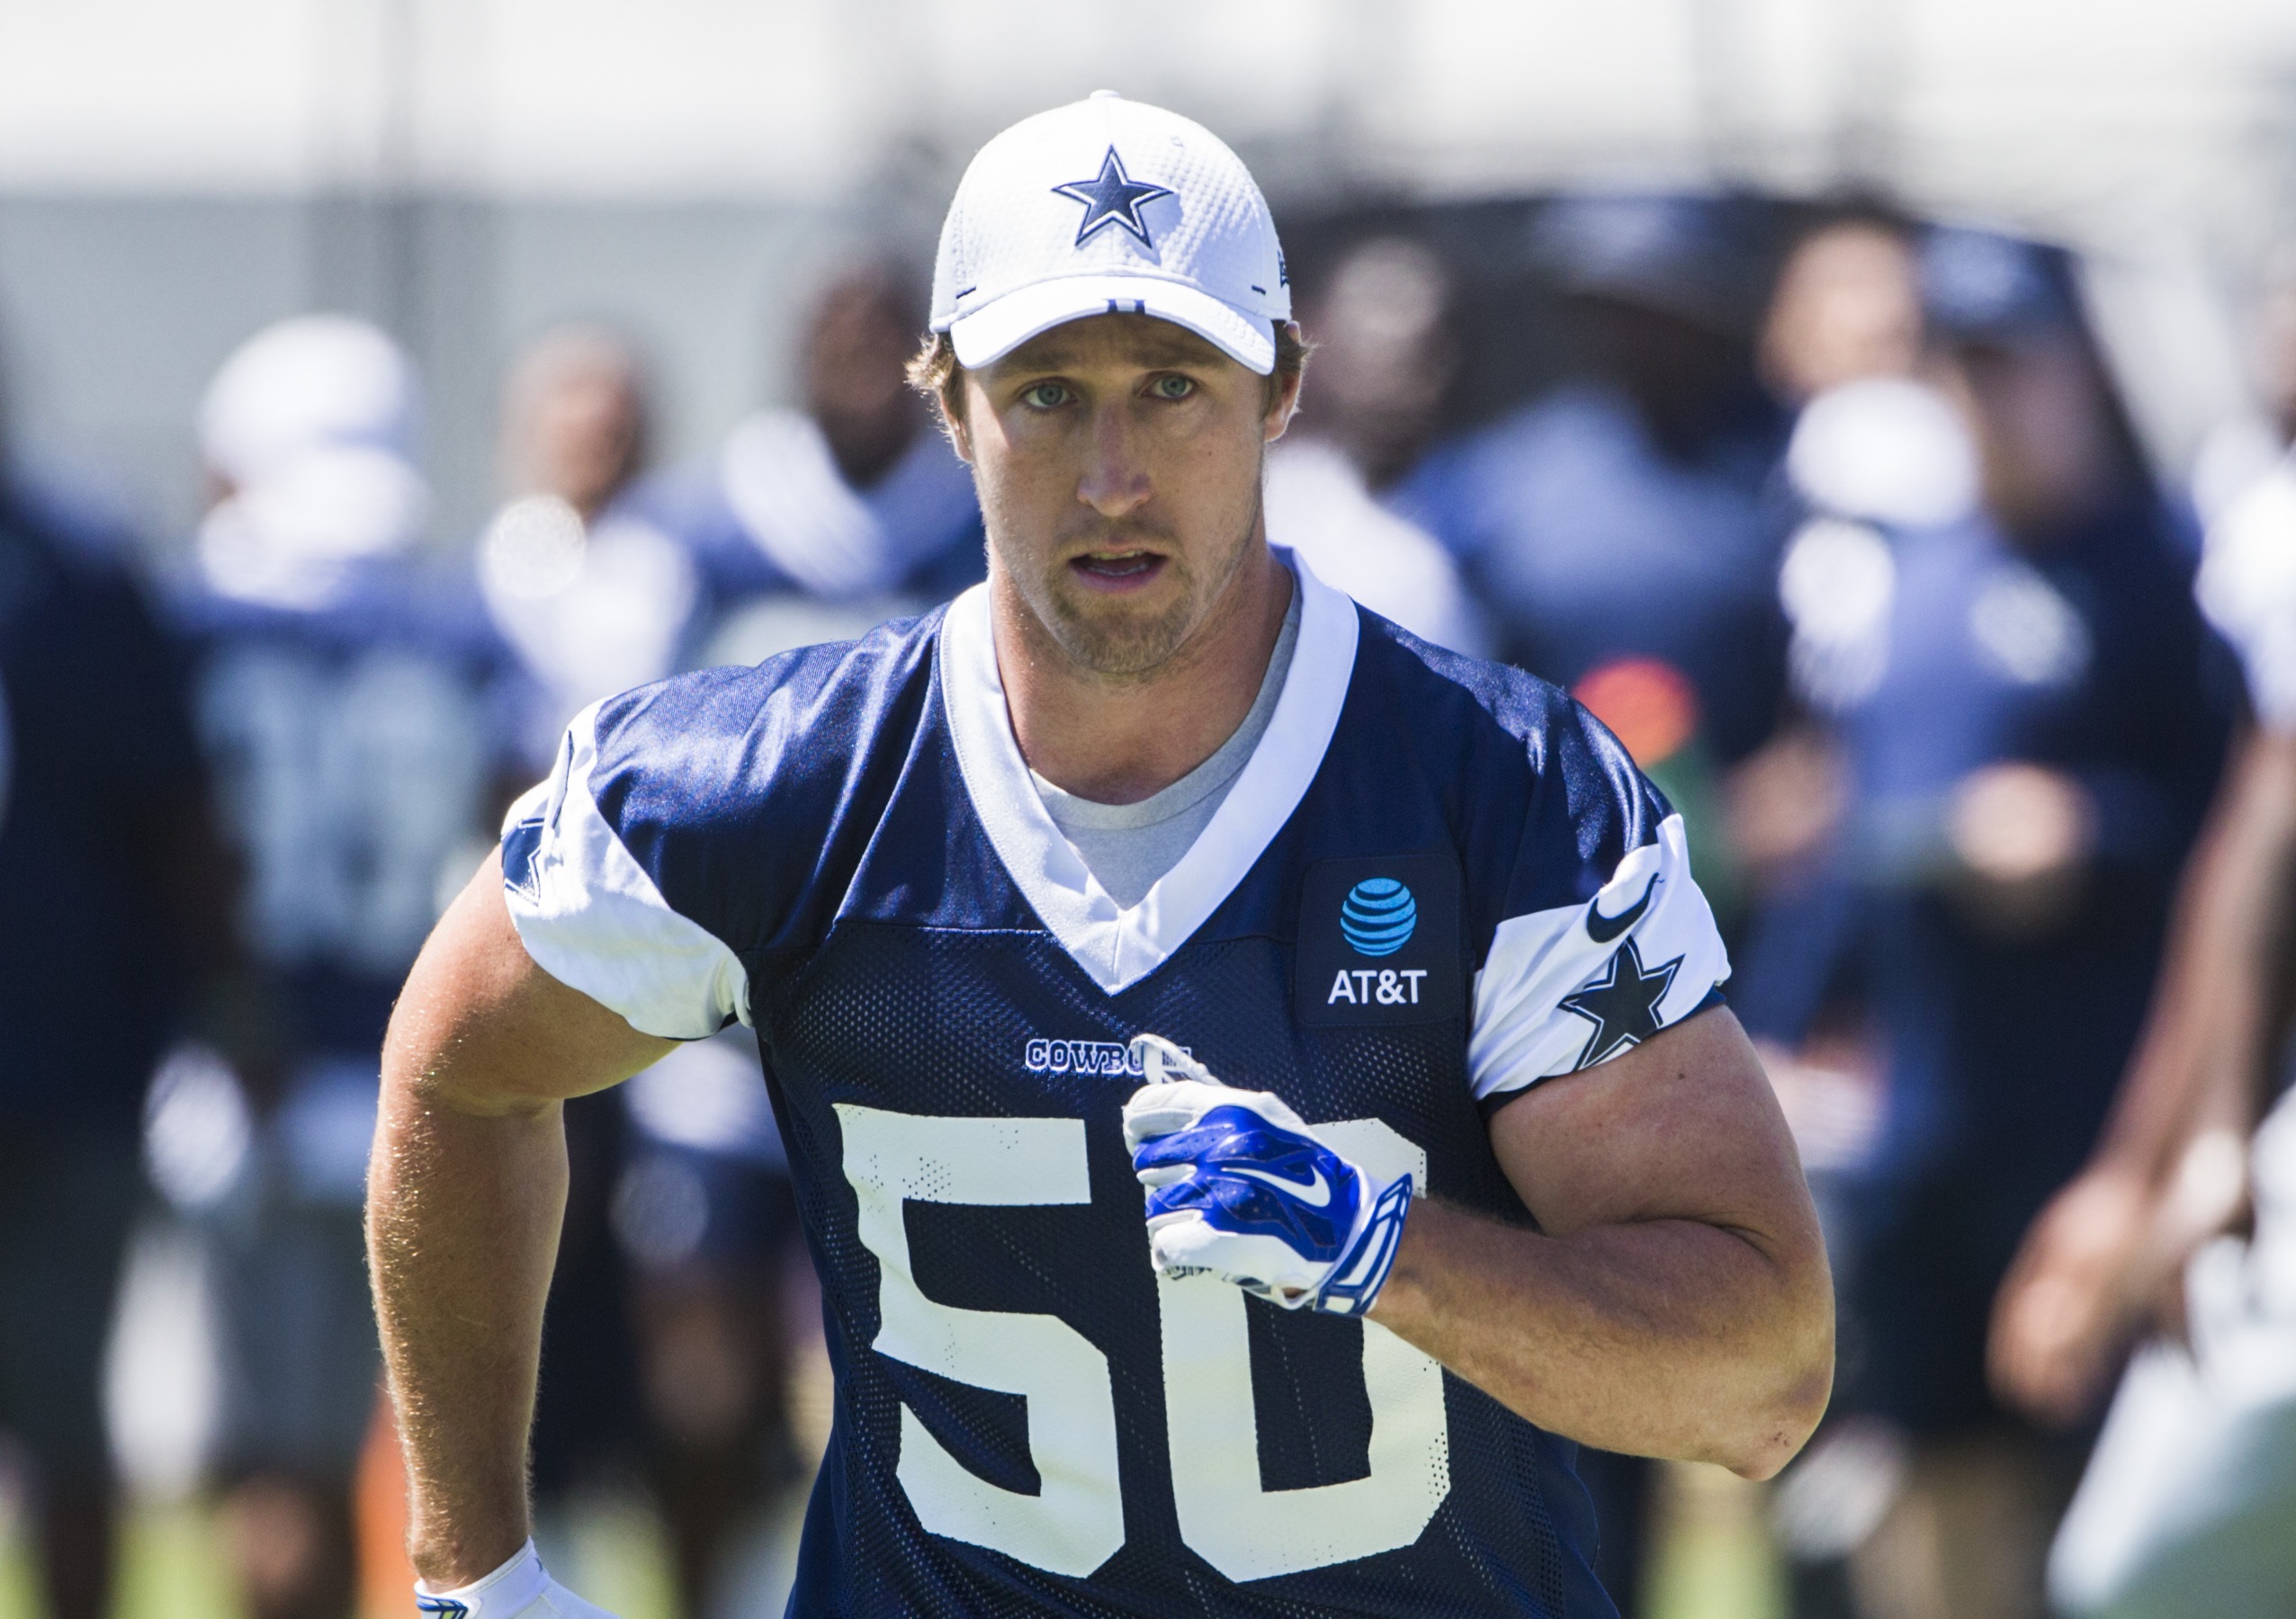 What does team mean to Cowboys LB Sean Lee? Lastest examples came within  first few days of training camp